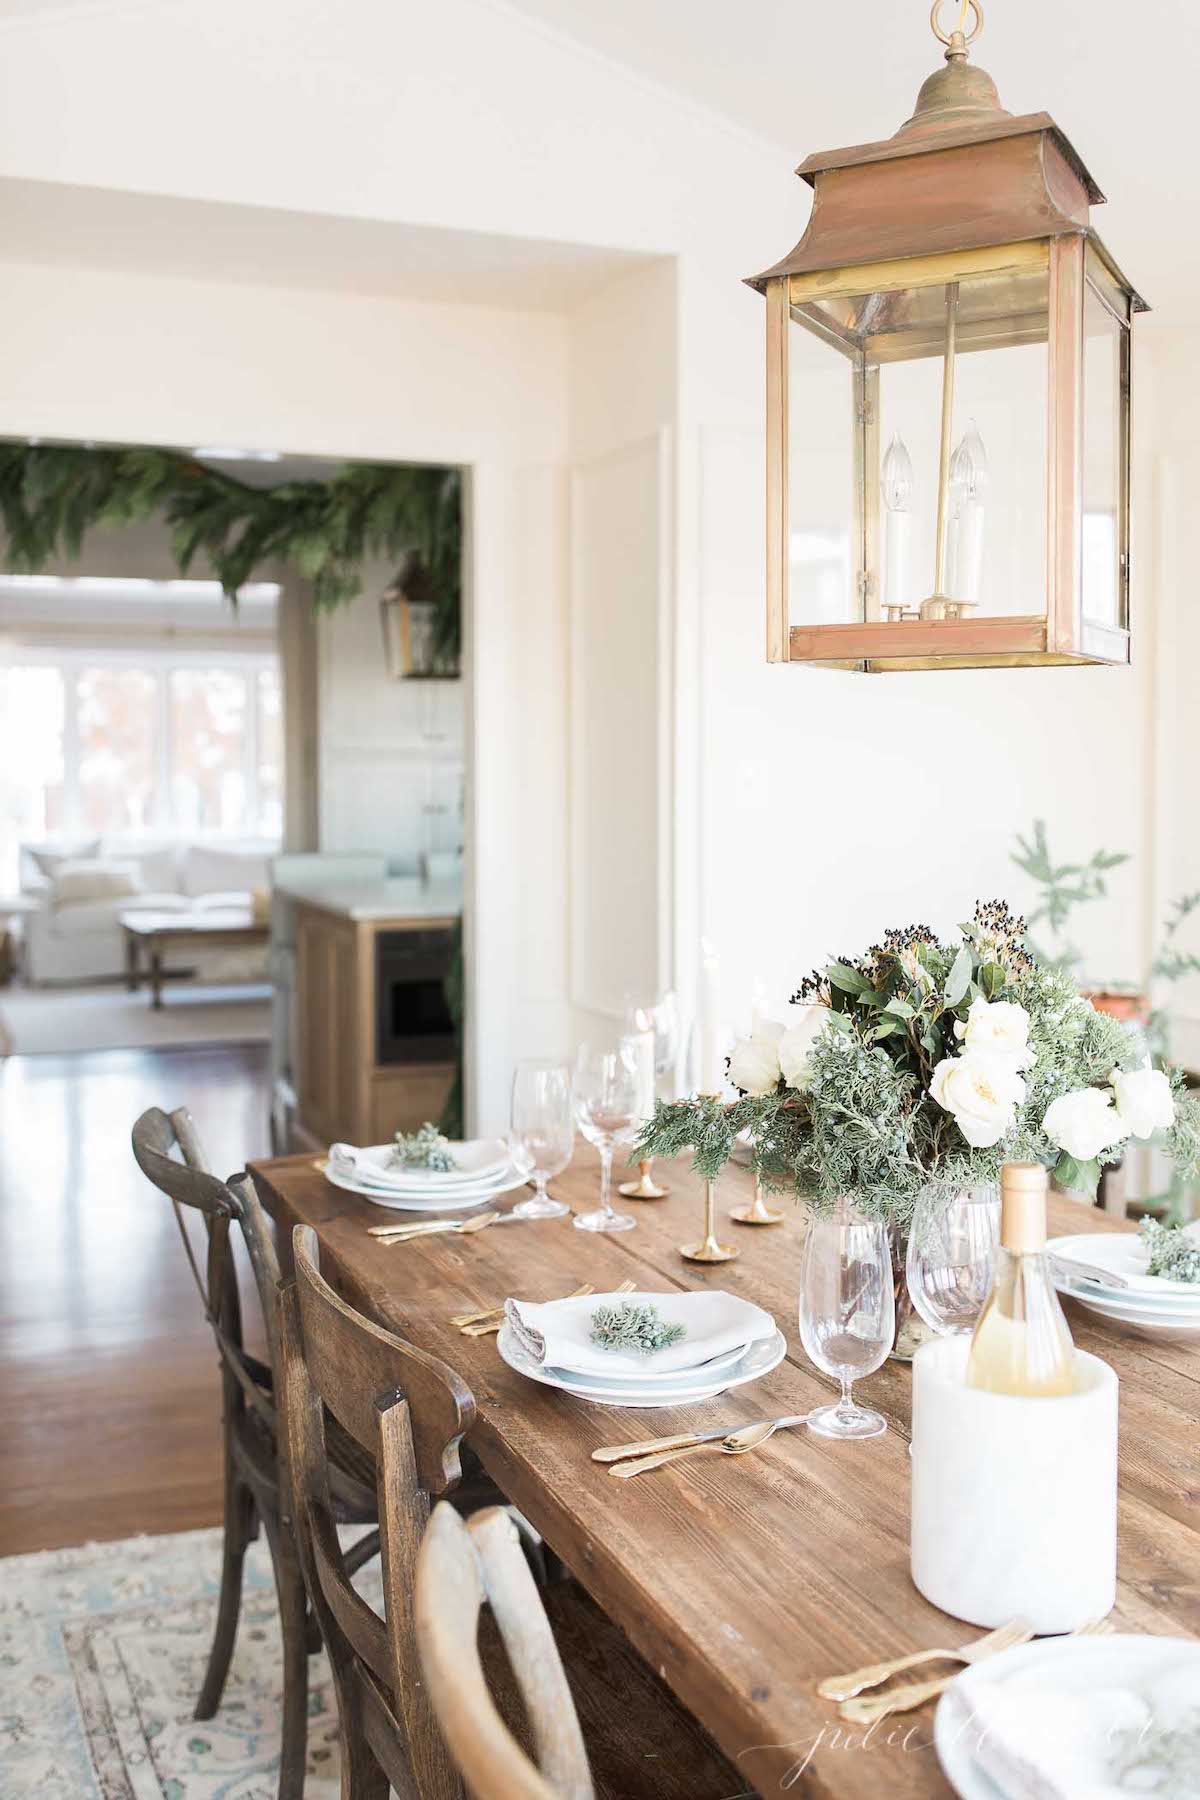 A dining room with a wooden table and greenery.